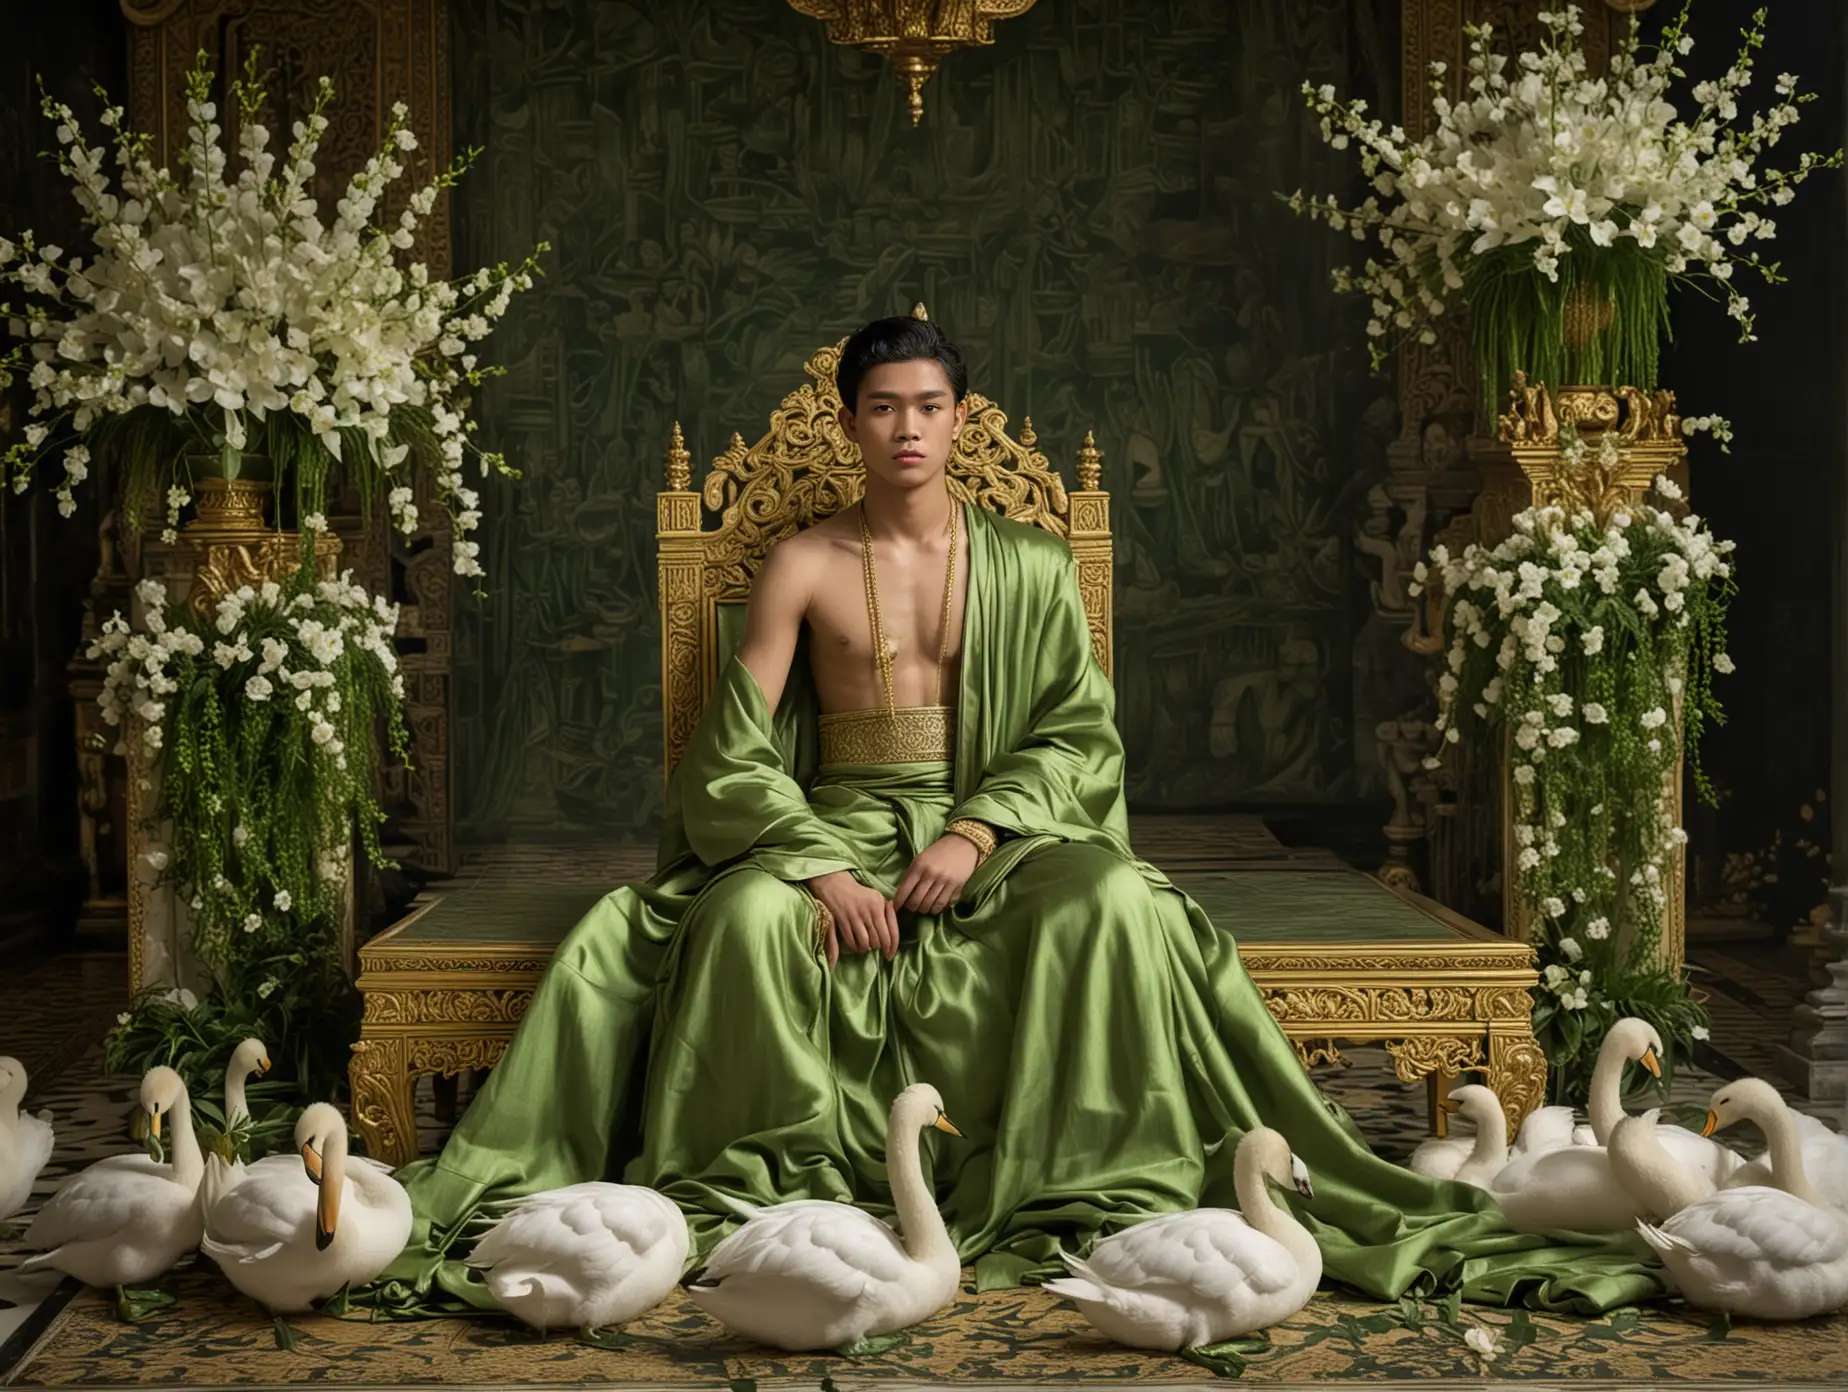 a 15 year old male Indonesian king with wavy black hair, white skin, bare chest wearing a long green cloth and green shoes, sitting on a gold and green throne. all around there are white swans and jasmine flowers in the gold and green temple at night